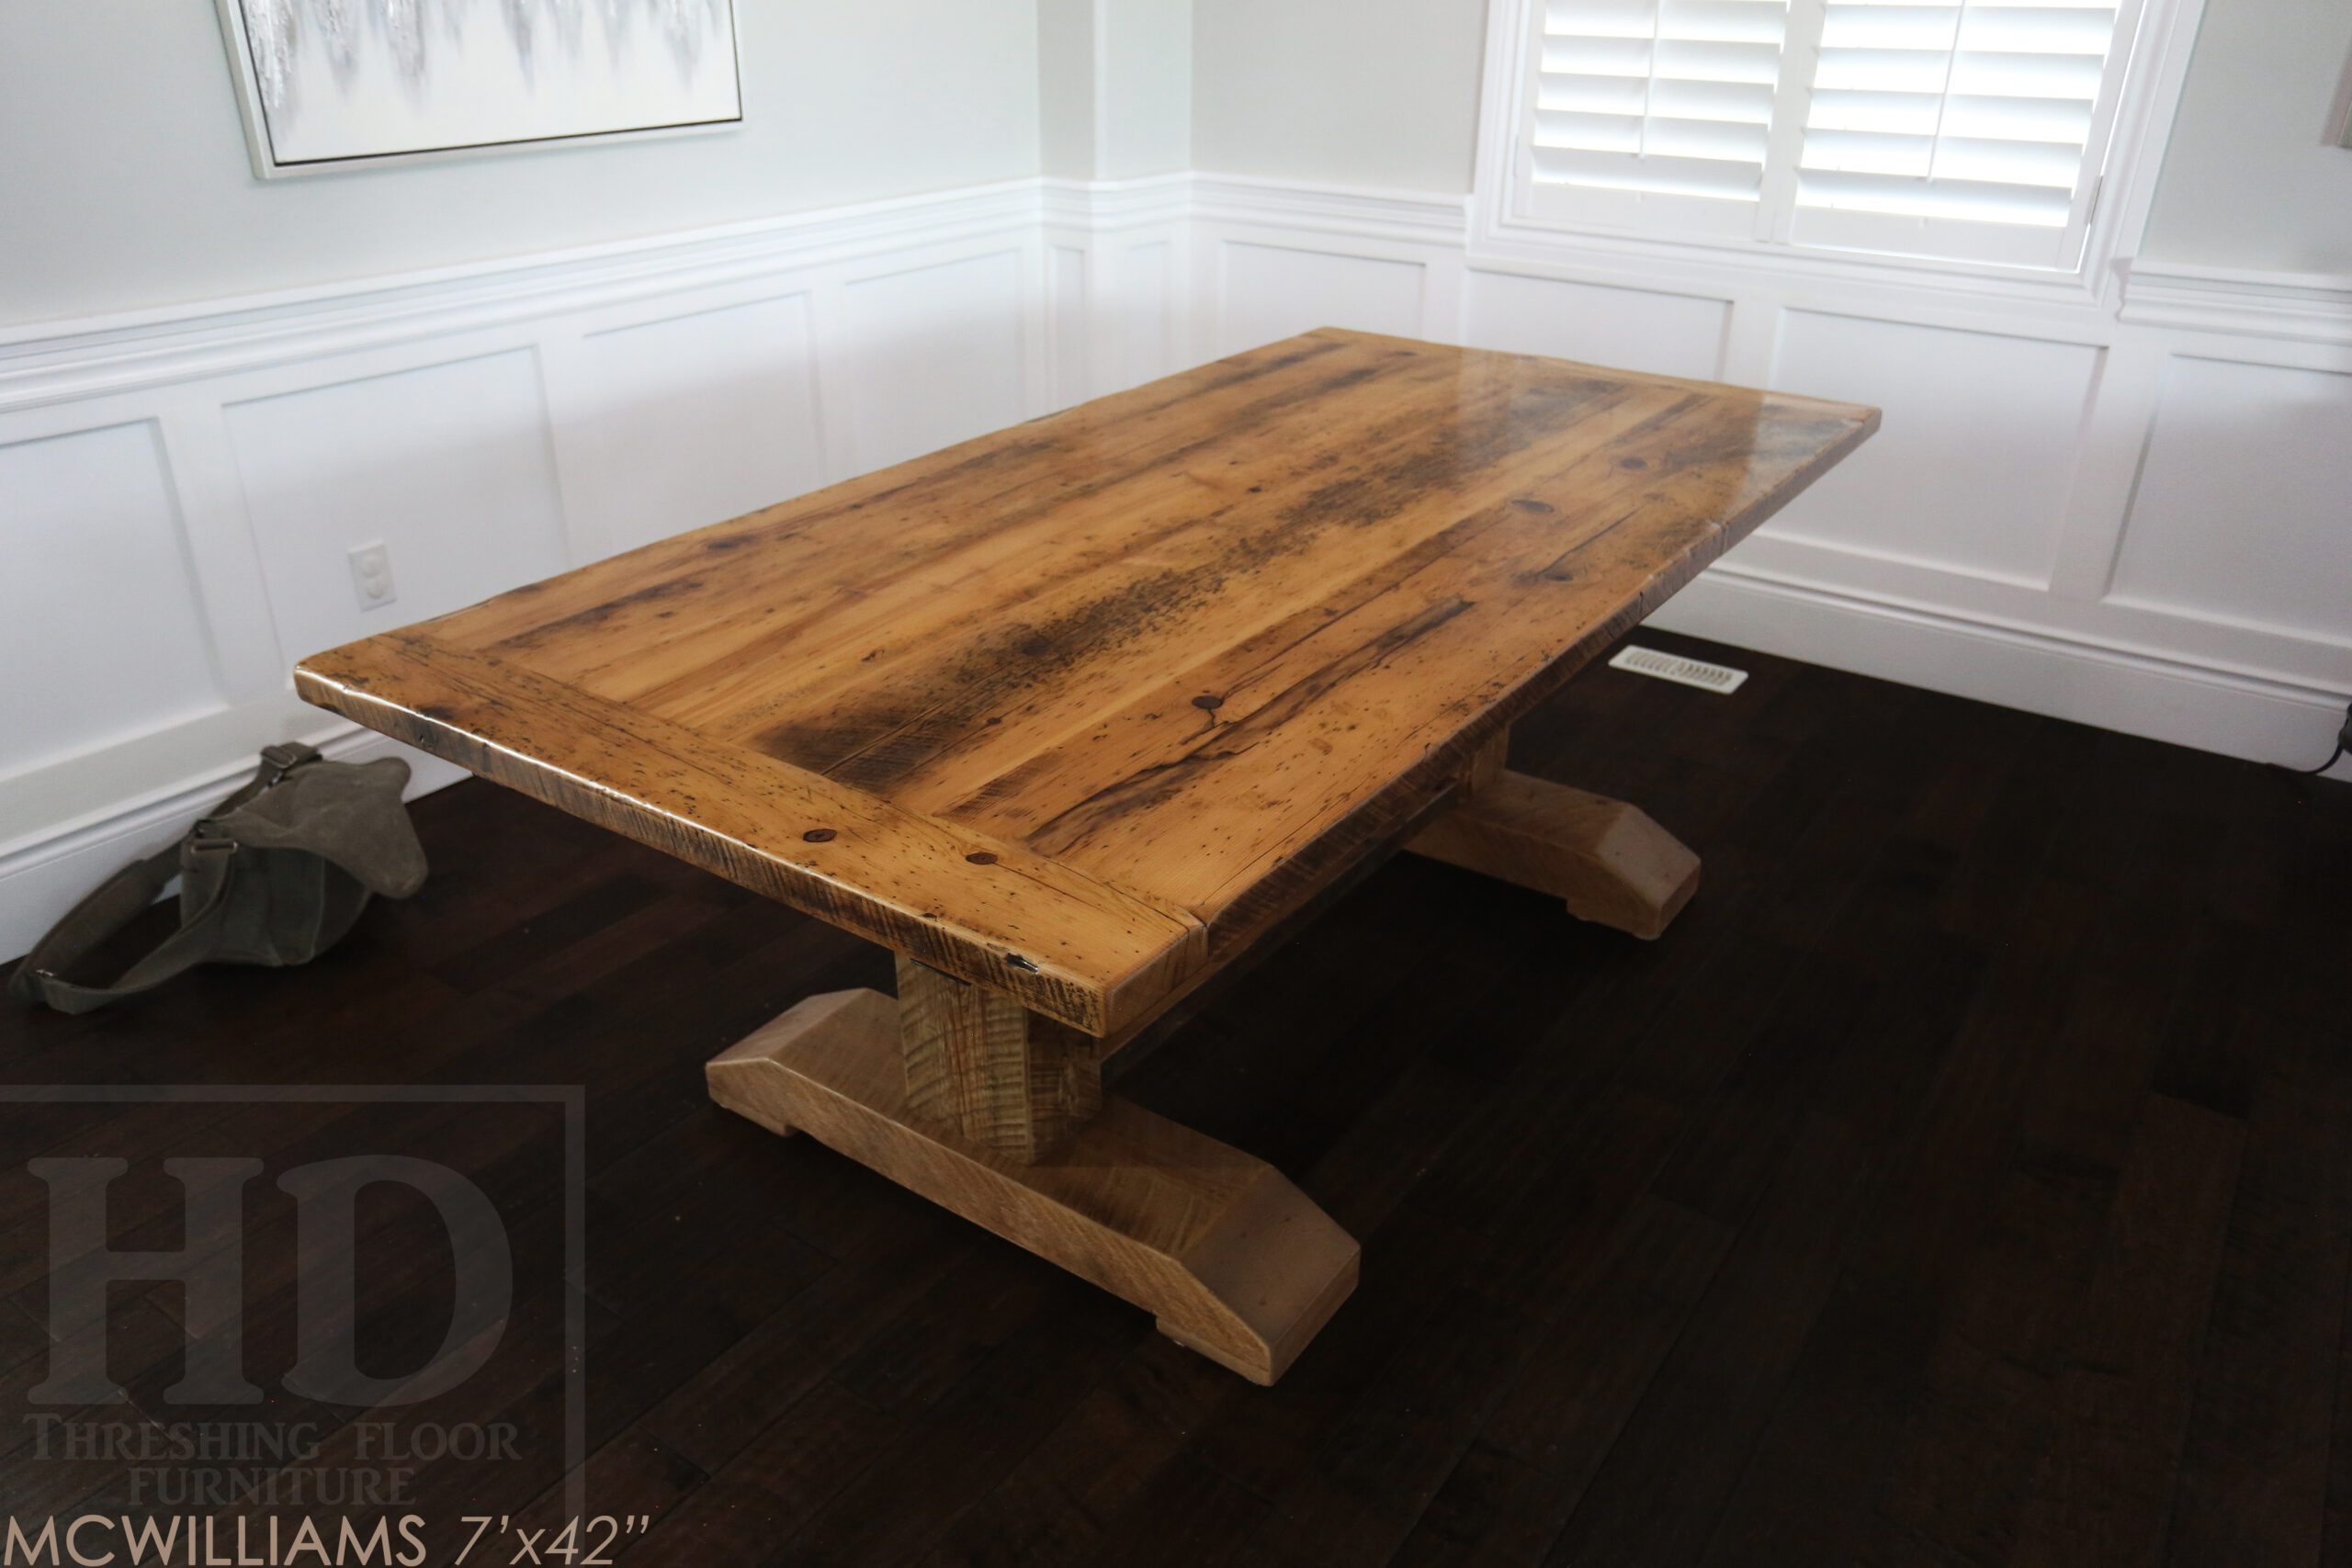 7' Reclaimed Wood Pedestal Table we made for a Cambridge, Ontario home - 42" wide - Beam Posts + Rail Option - Old Growth Hemlock Threshing Floor Construction - Original edges & distressing maintained - Greytone Treatment Option - Premium epoxy + satin polyurethane finish - Two 18" leaves [making total length 10 ft when extended] - www.table.ca